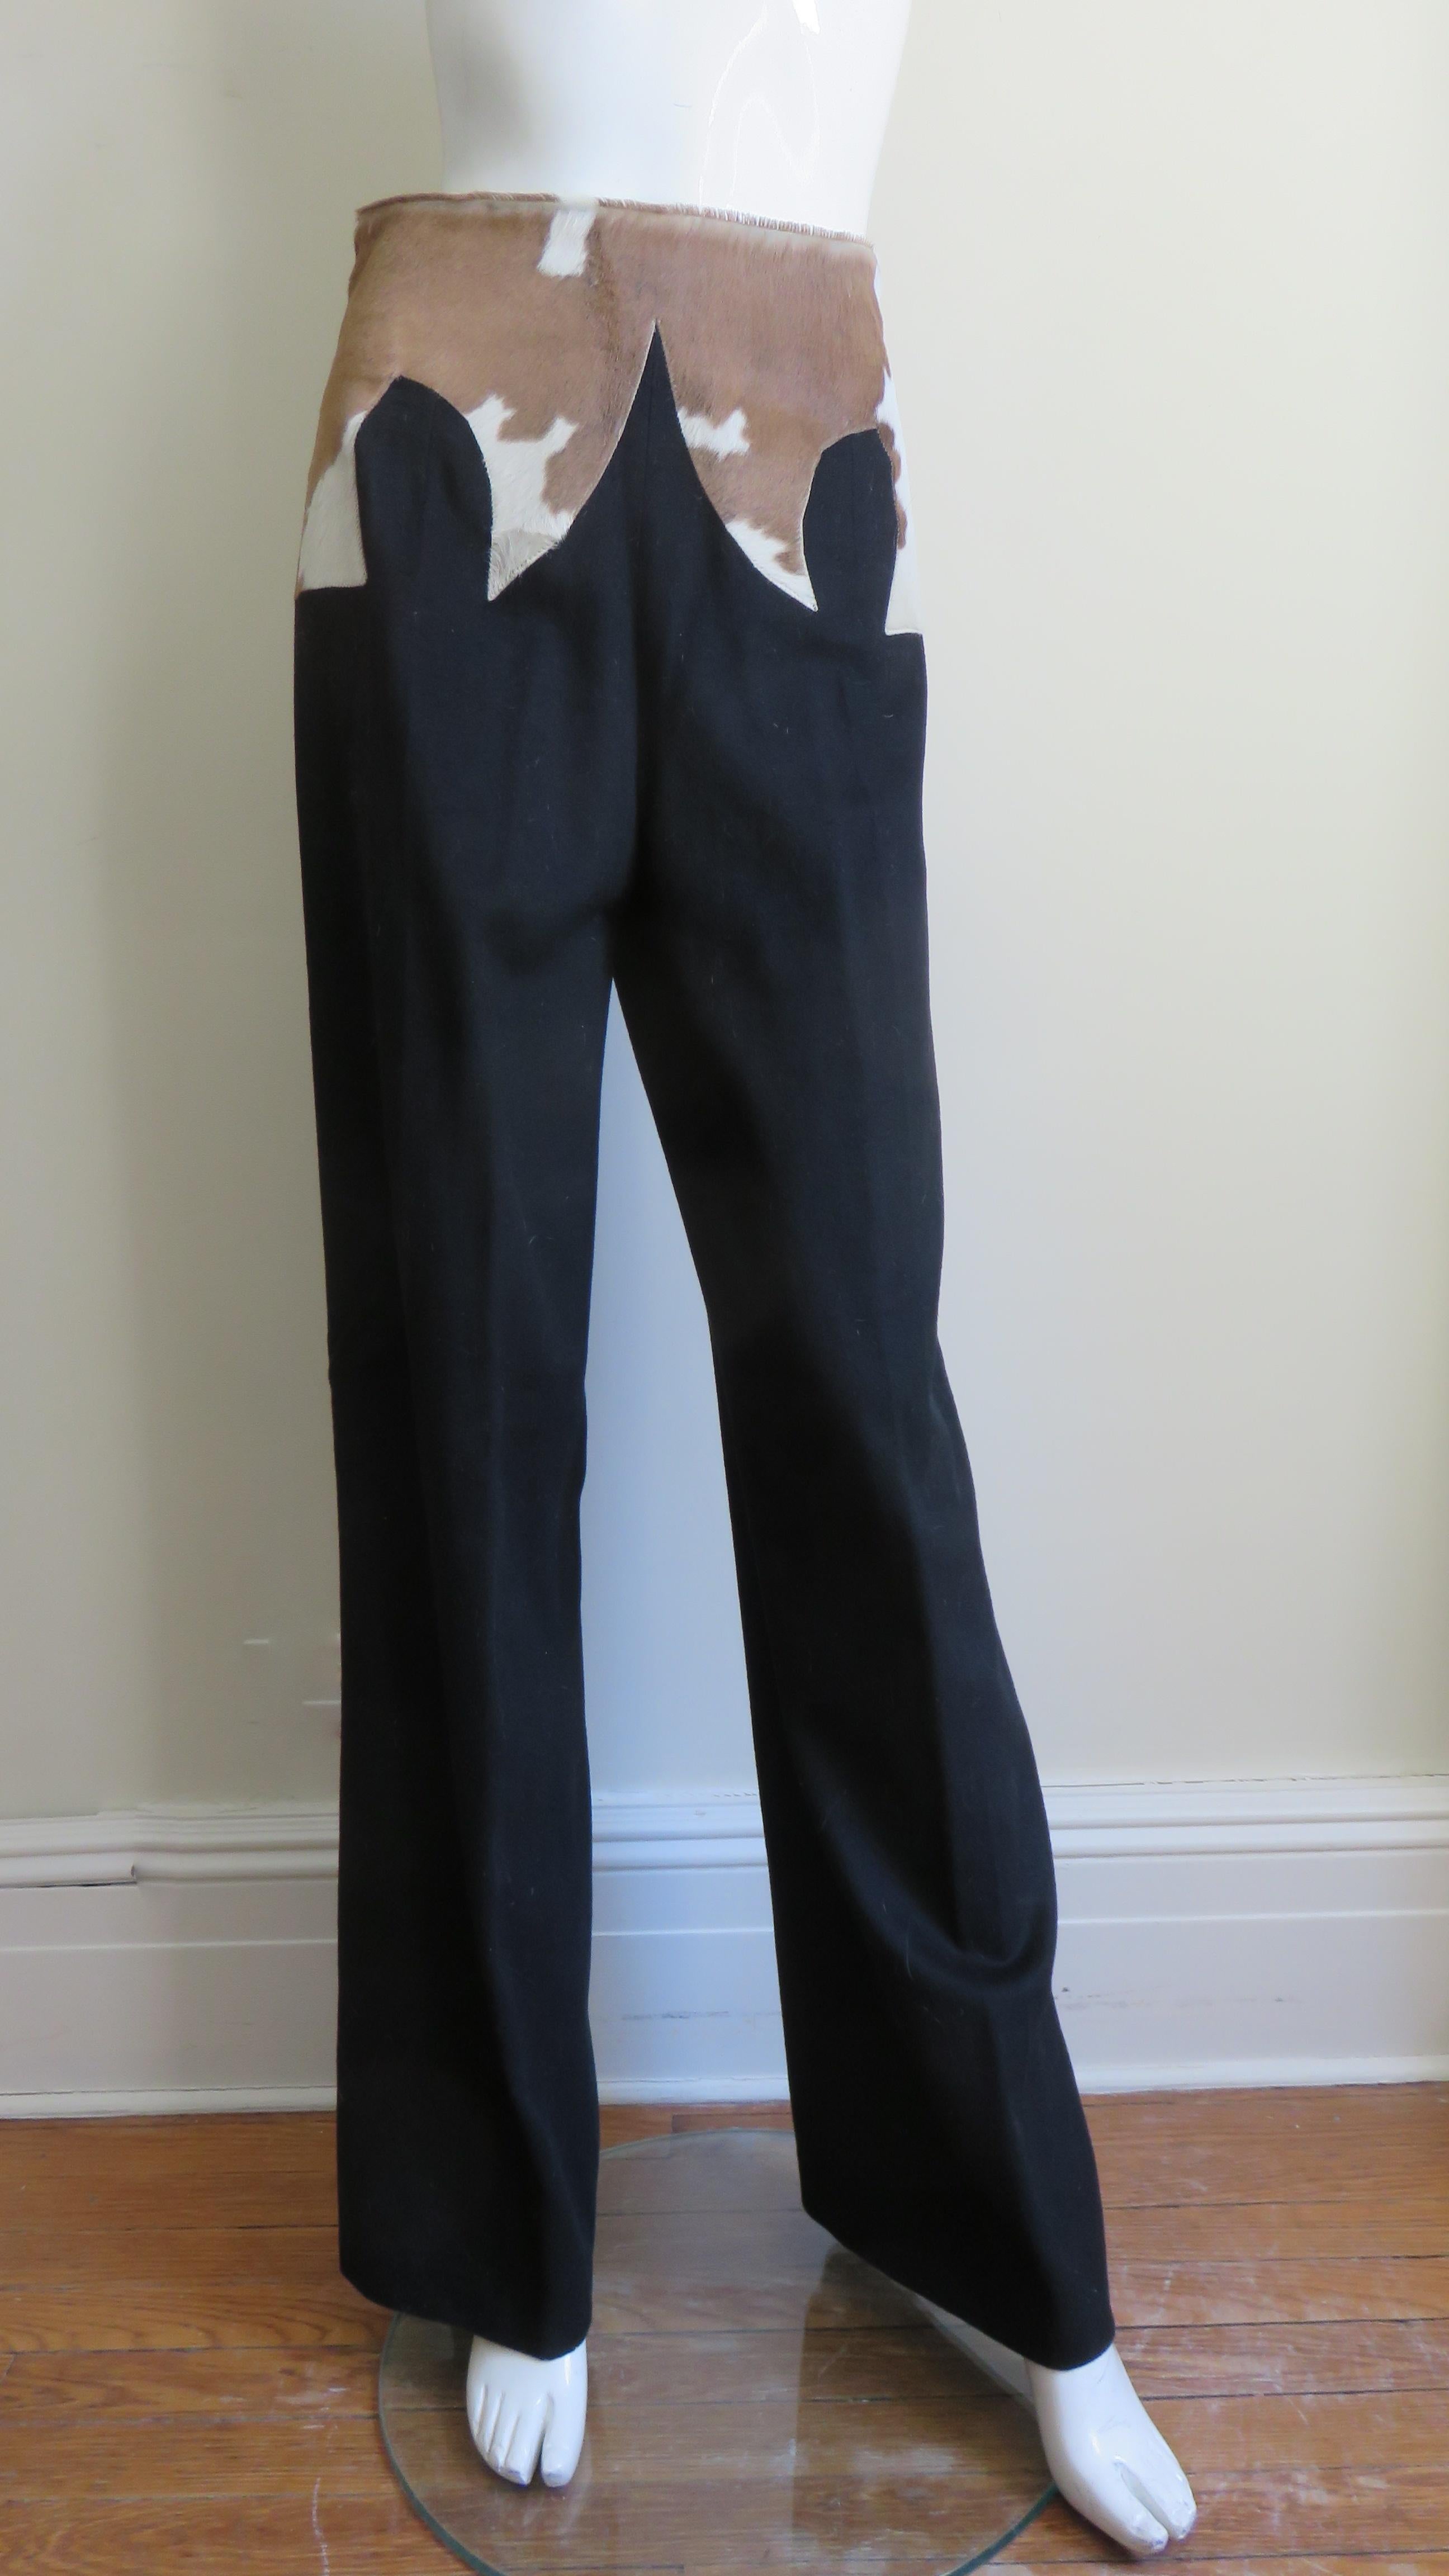 Fabulous black wool pants by Alexander McQueen from his famous iconic 'It's a Jungle Out There' F/W 1997 collection. They are a real stand out with a stylized multi point cowhide yoke applique at the waist. They have straight legs and a and side